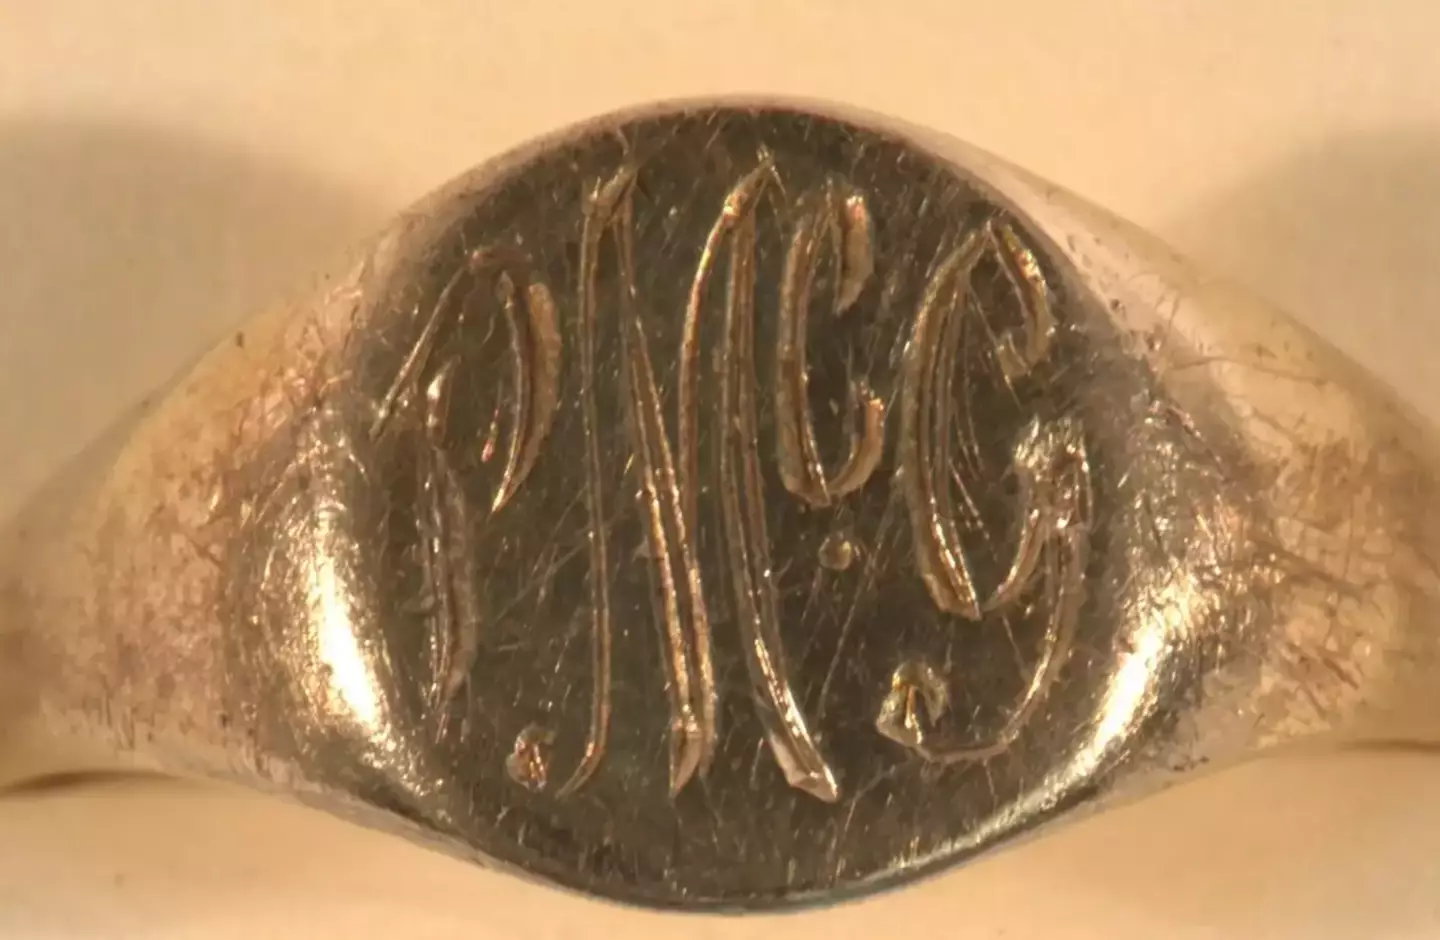 Patricia McGlone's ID matches the initials on a signet ring found next to her remains. (NYPD)